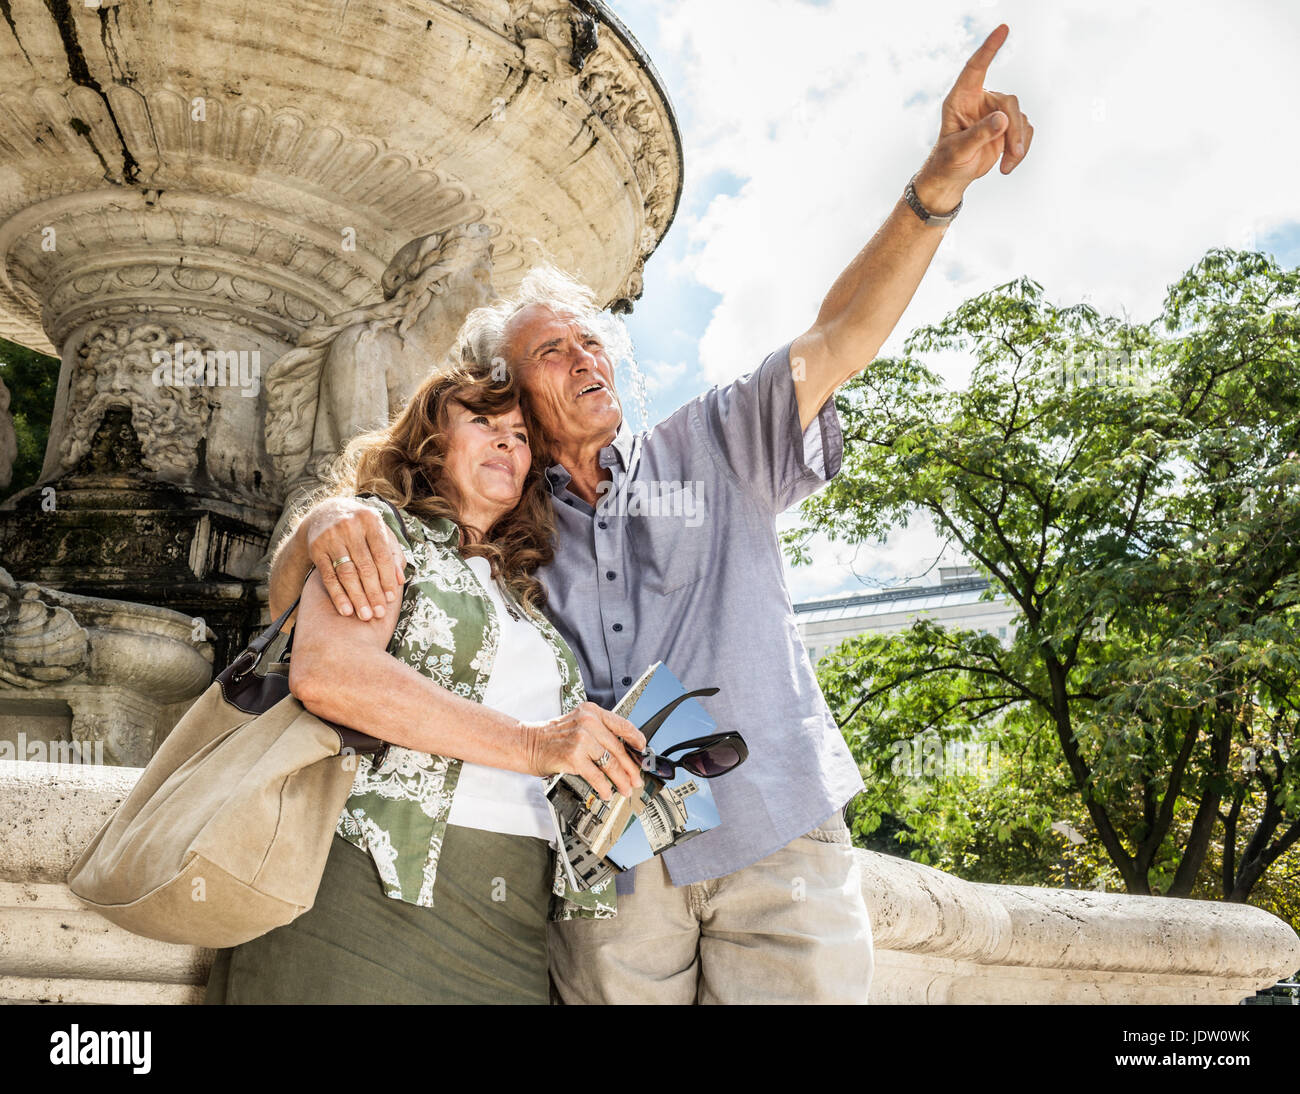 Older couple sightseeing together Stock Photo